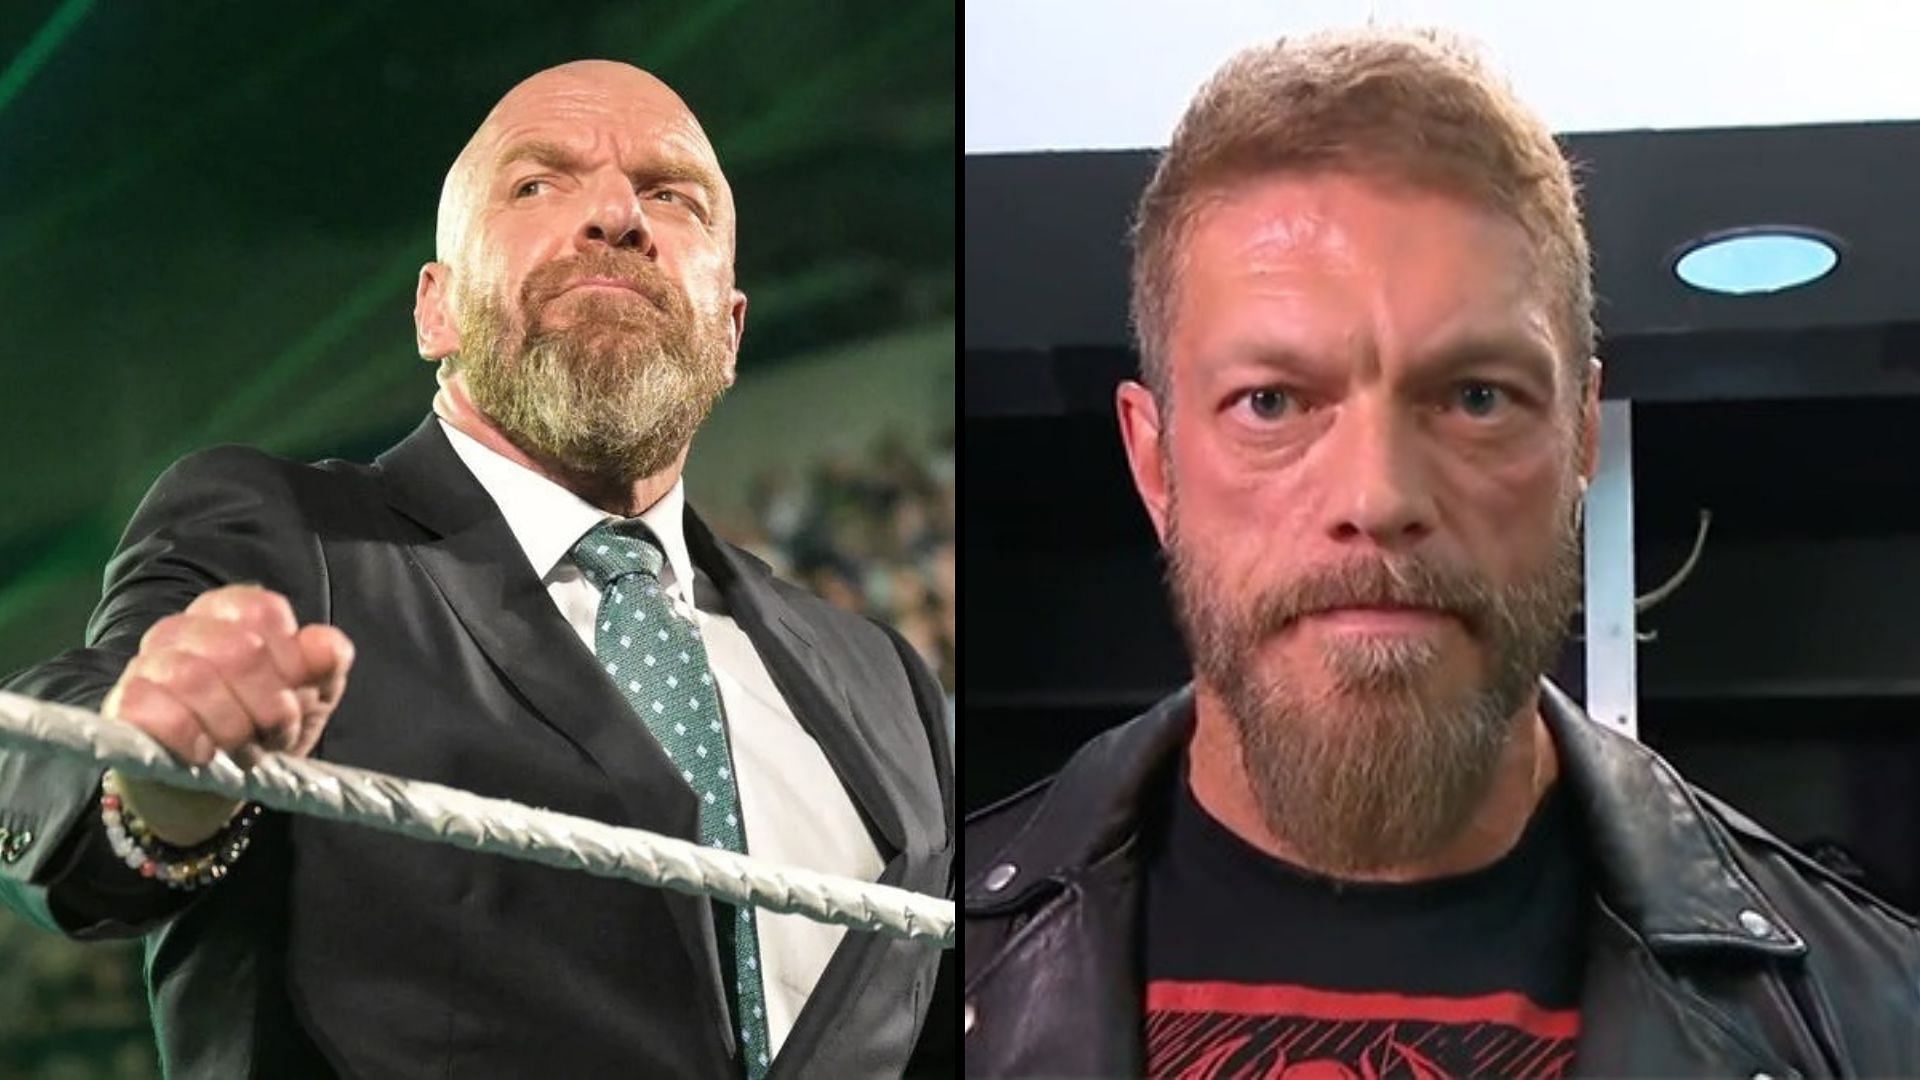 Triple H (left) and Edge (right) have worked alongside one another in WWE on multiple occasions